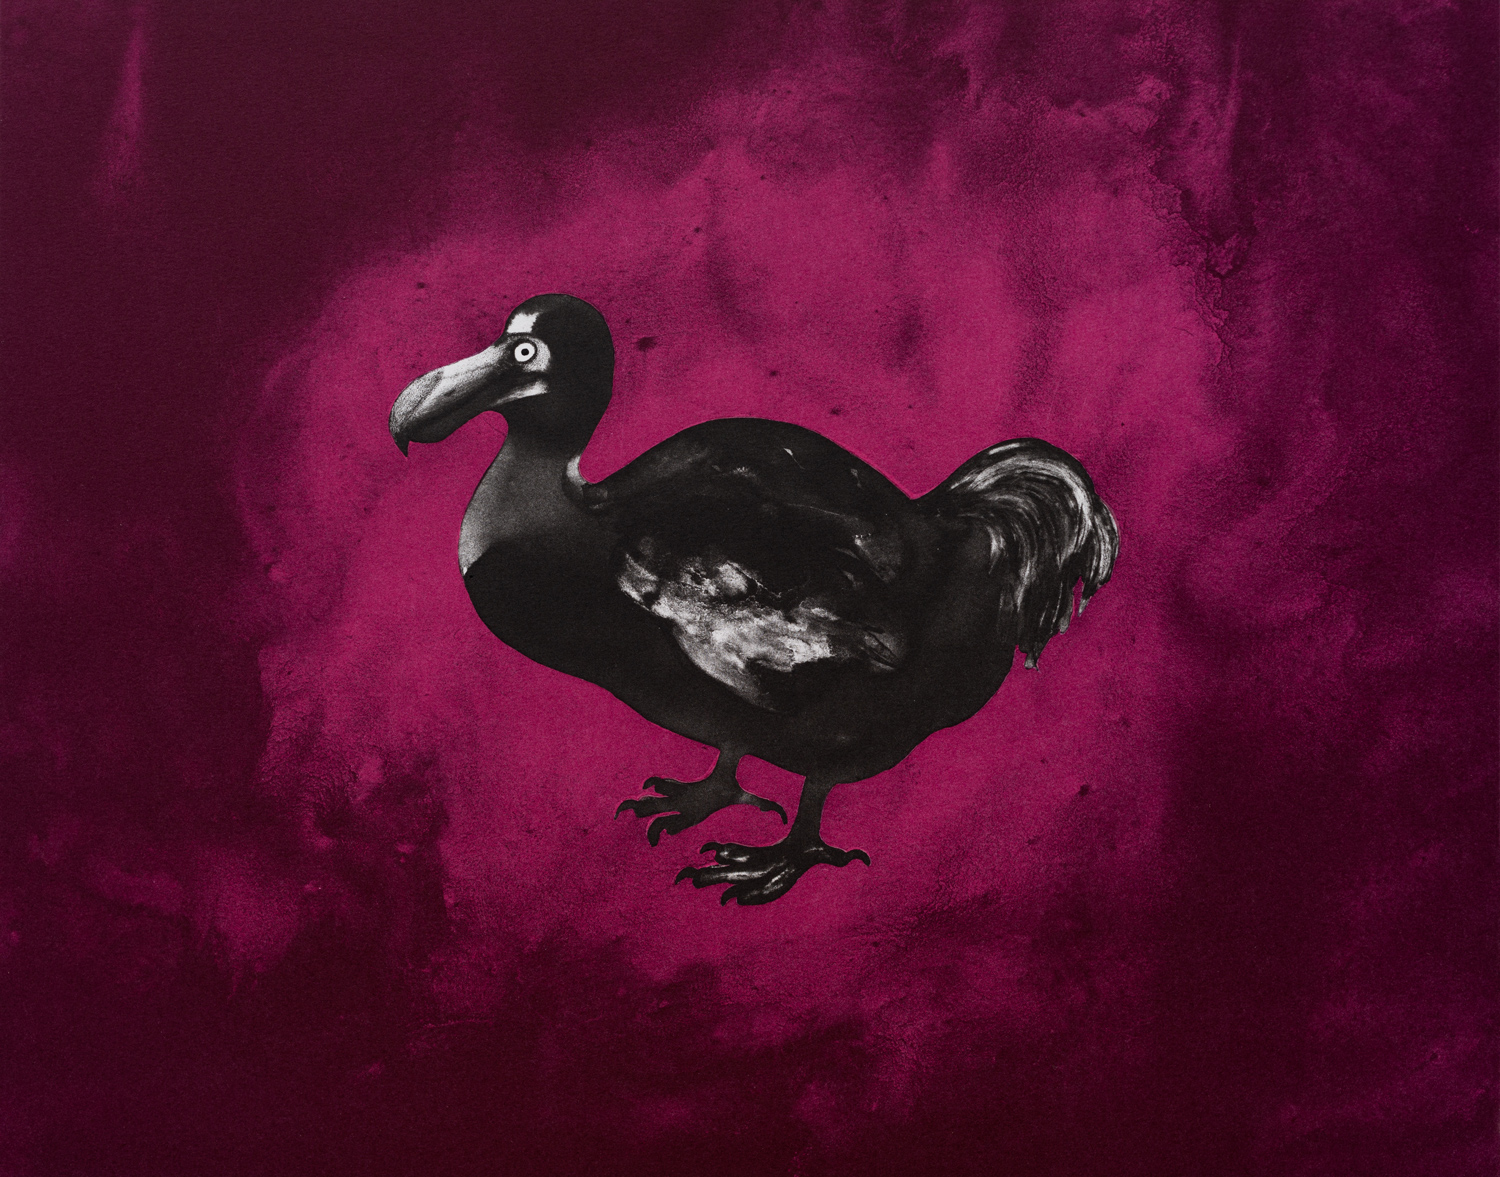 Roelants dodo Two Colour lithograph 41 x 48 cm, Edition of 10, 2018